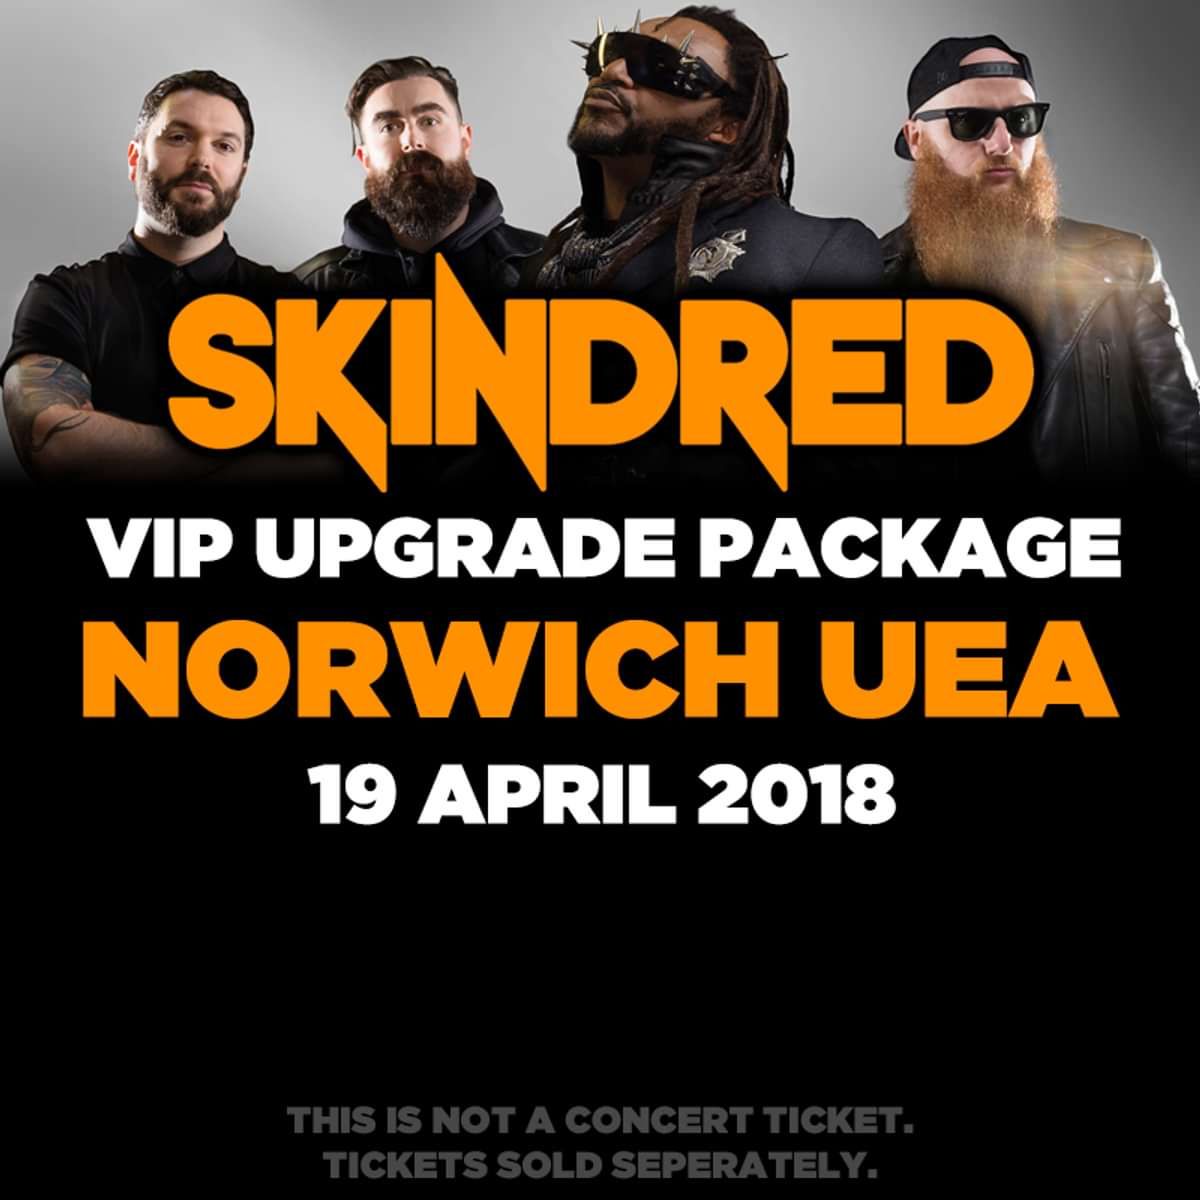 skindred tour norwich